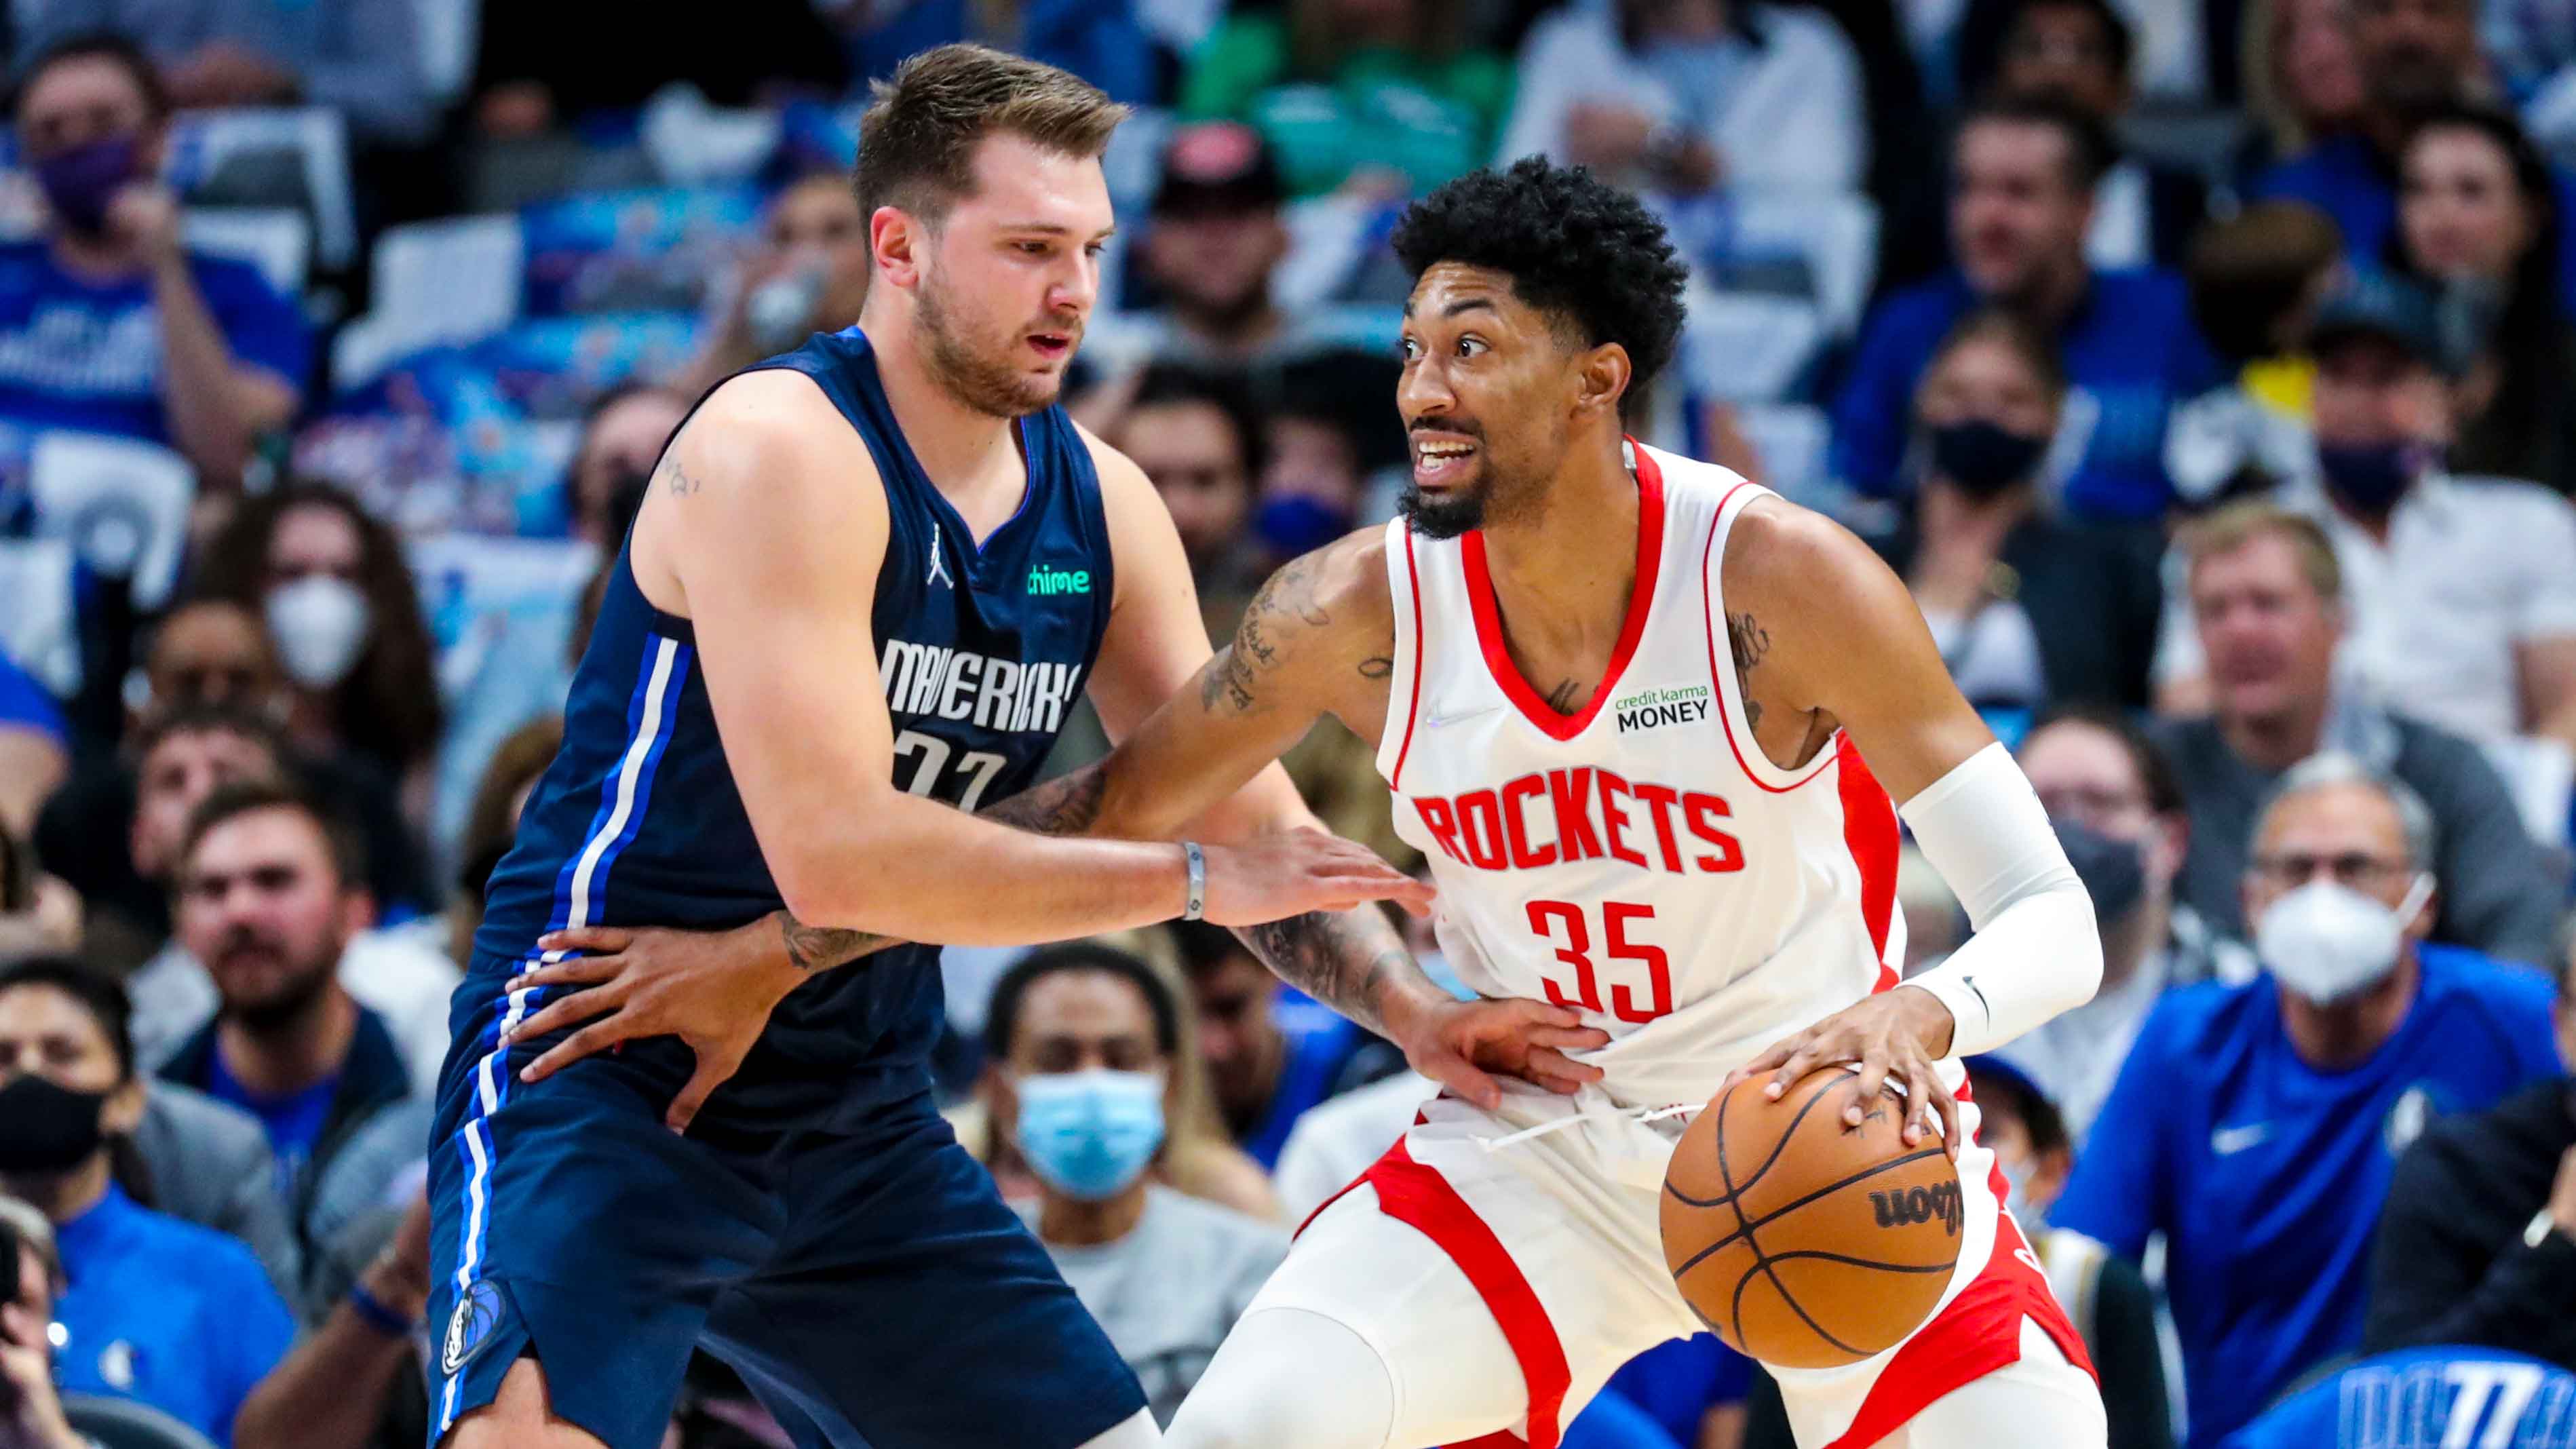 Rockets to sign Sterling Brown to one-year deal